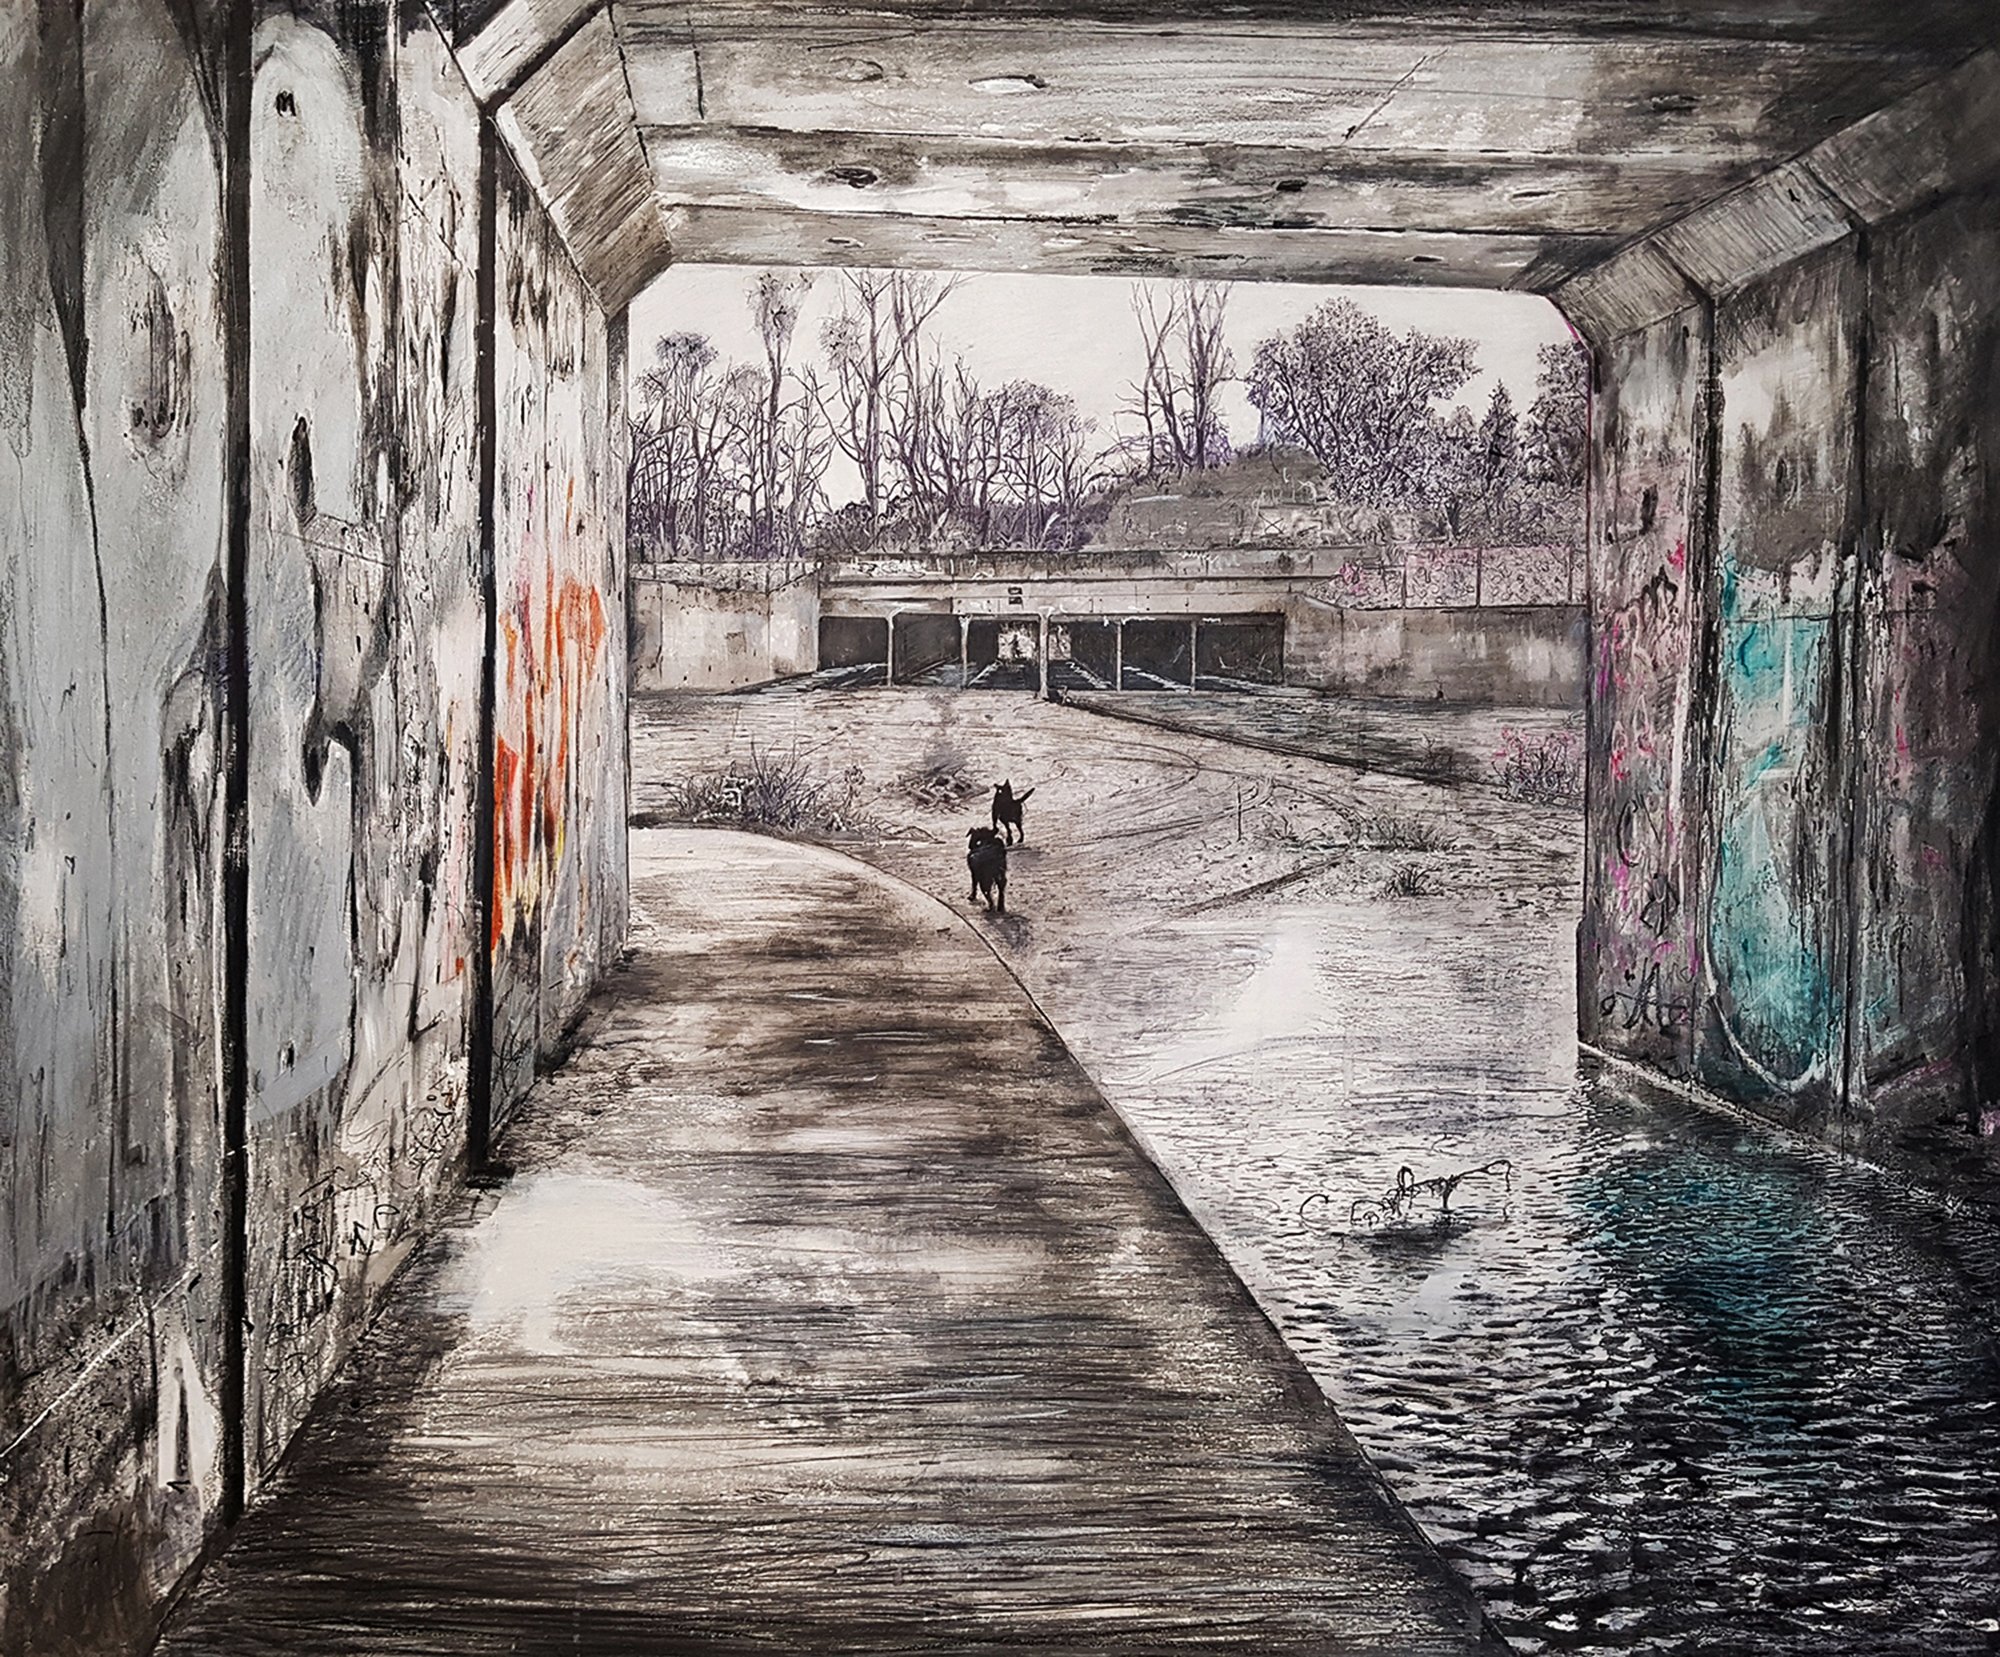 Someplace else unknown: ballpoint, ink, pencils, charcoal, highlighter markers, spray paint on gesso on hardboard 102 x 83 cm 2018